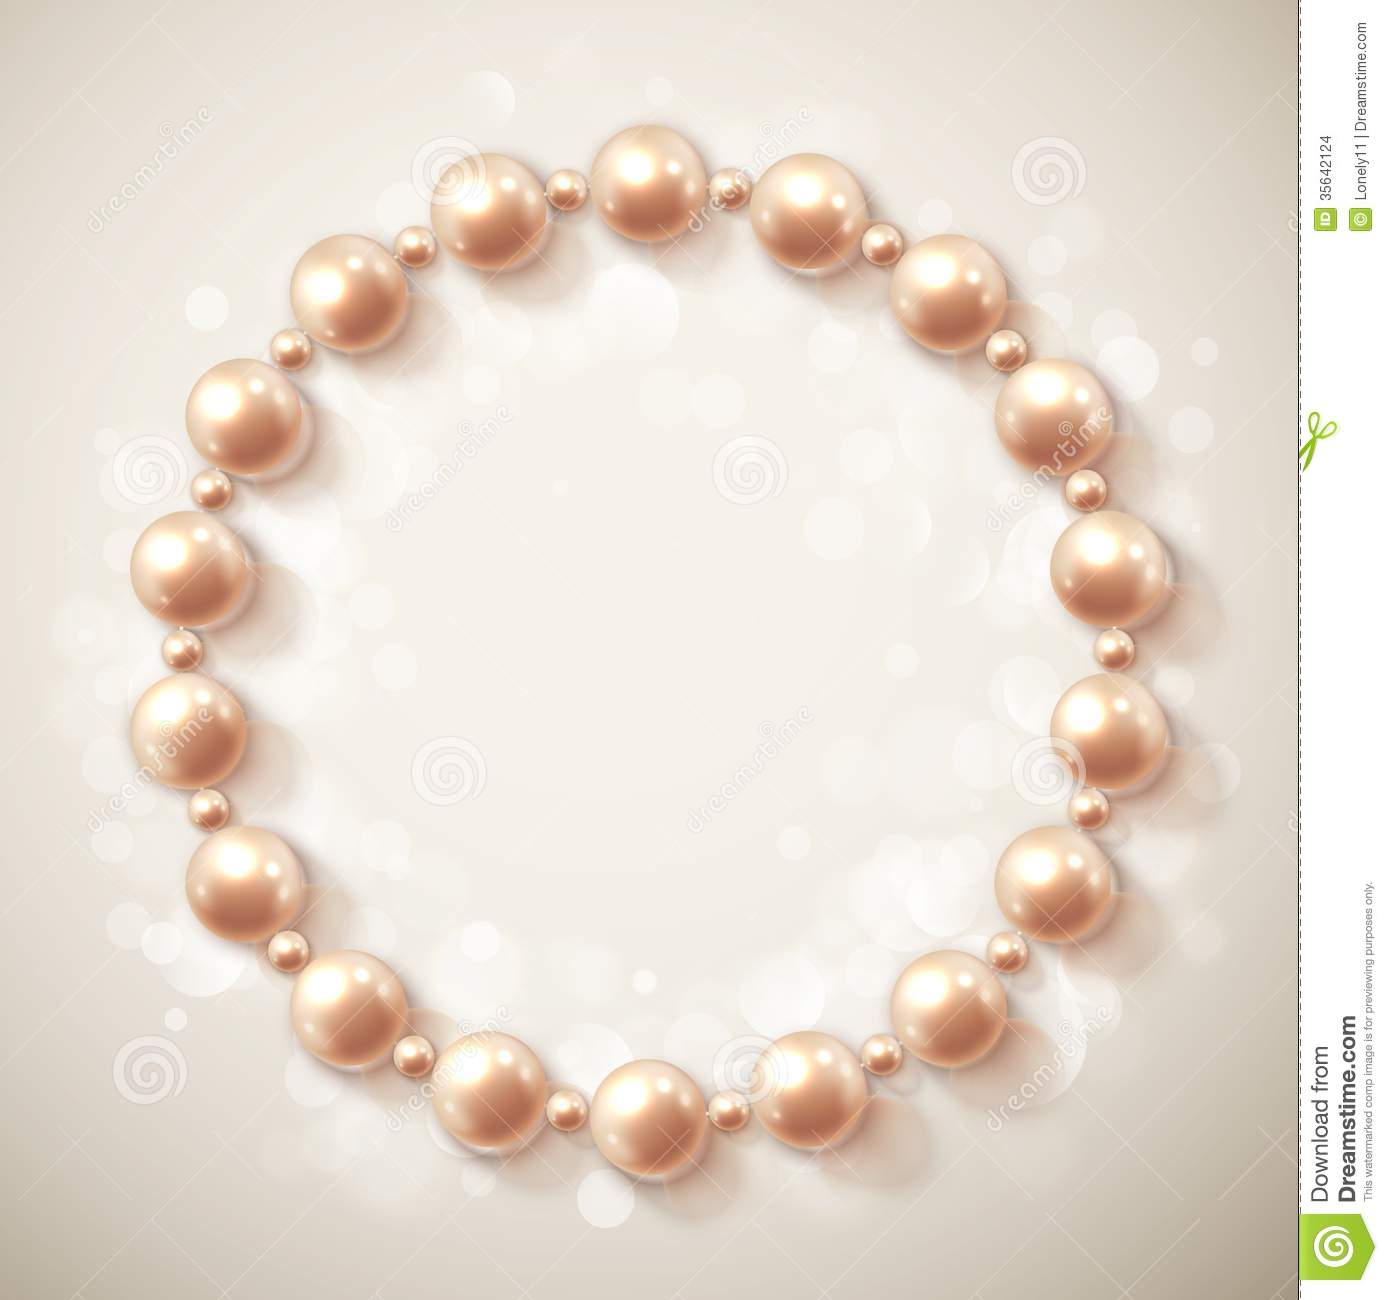 Circle Of Pearls Stock Images   Image  35642124